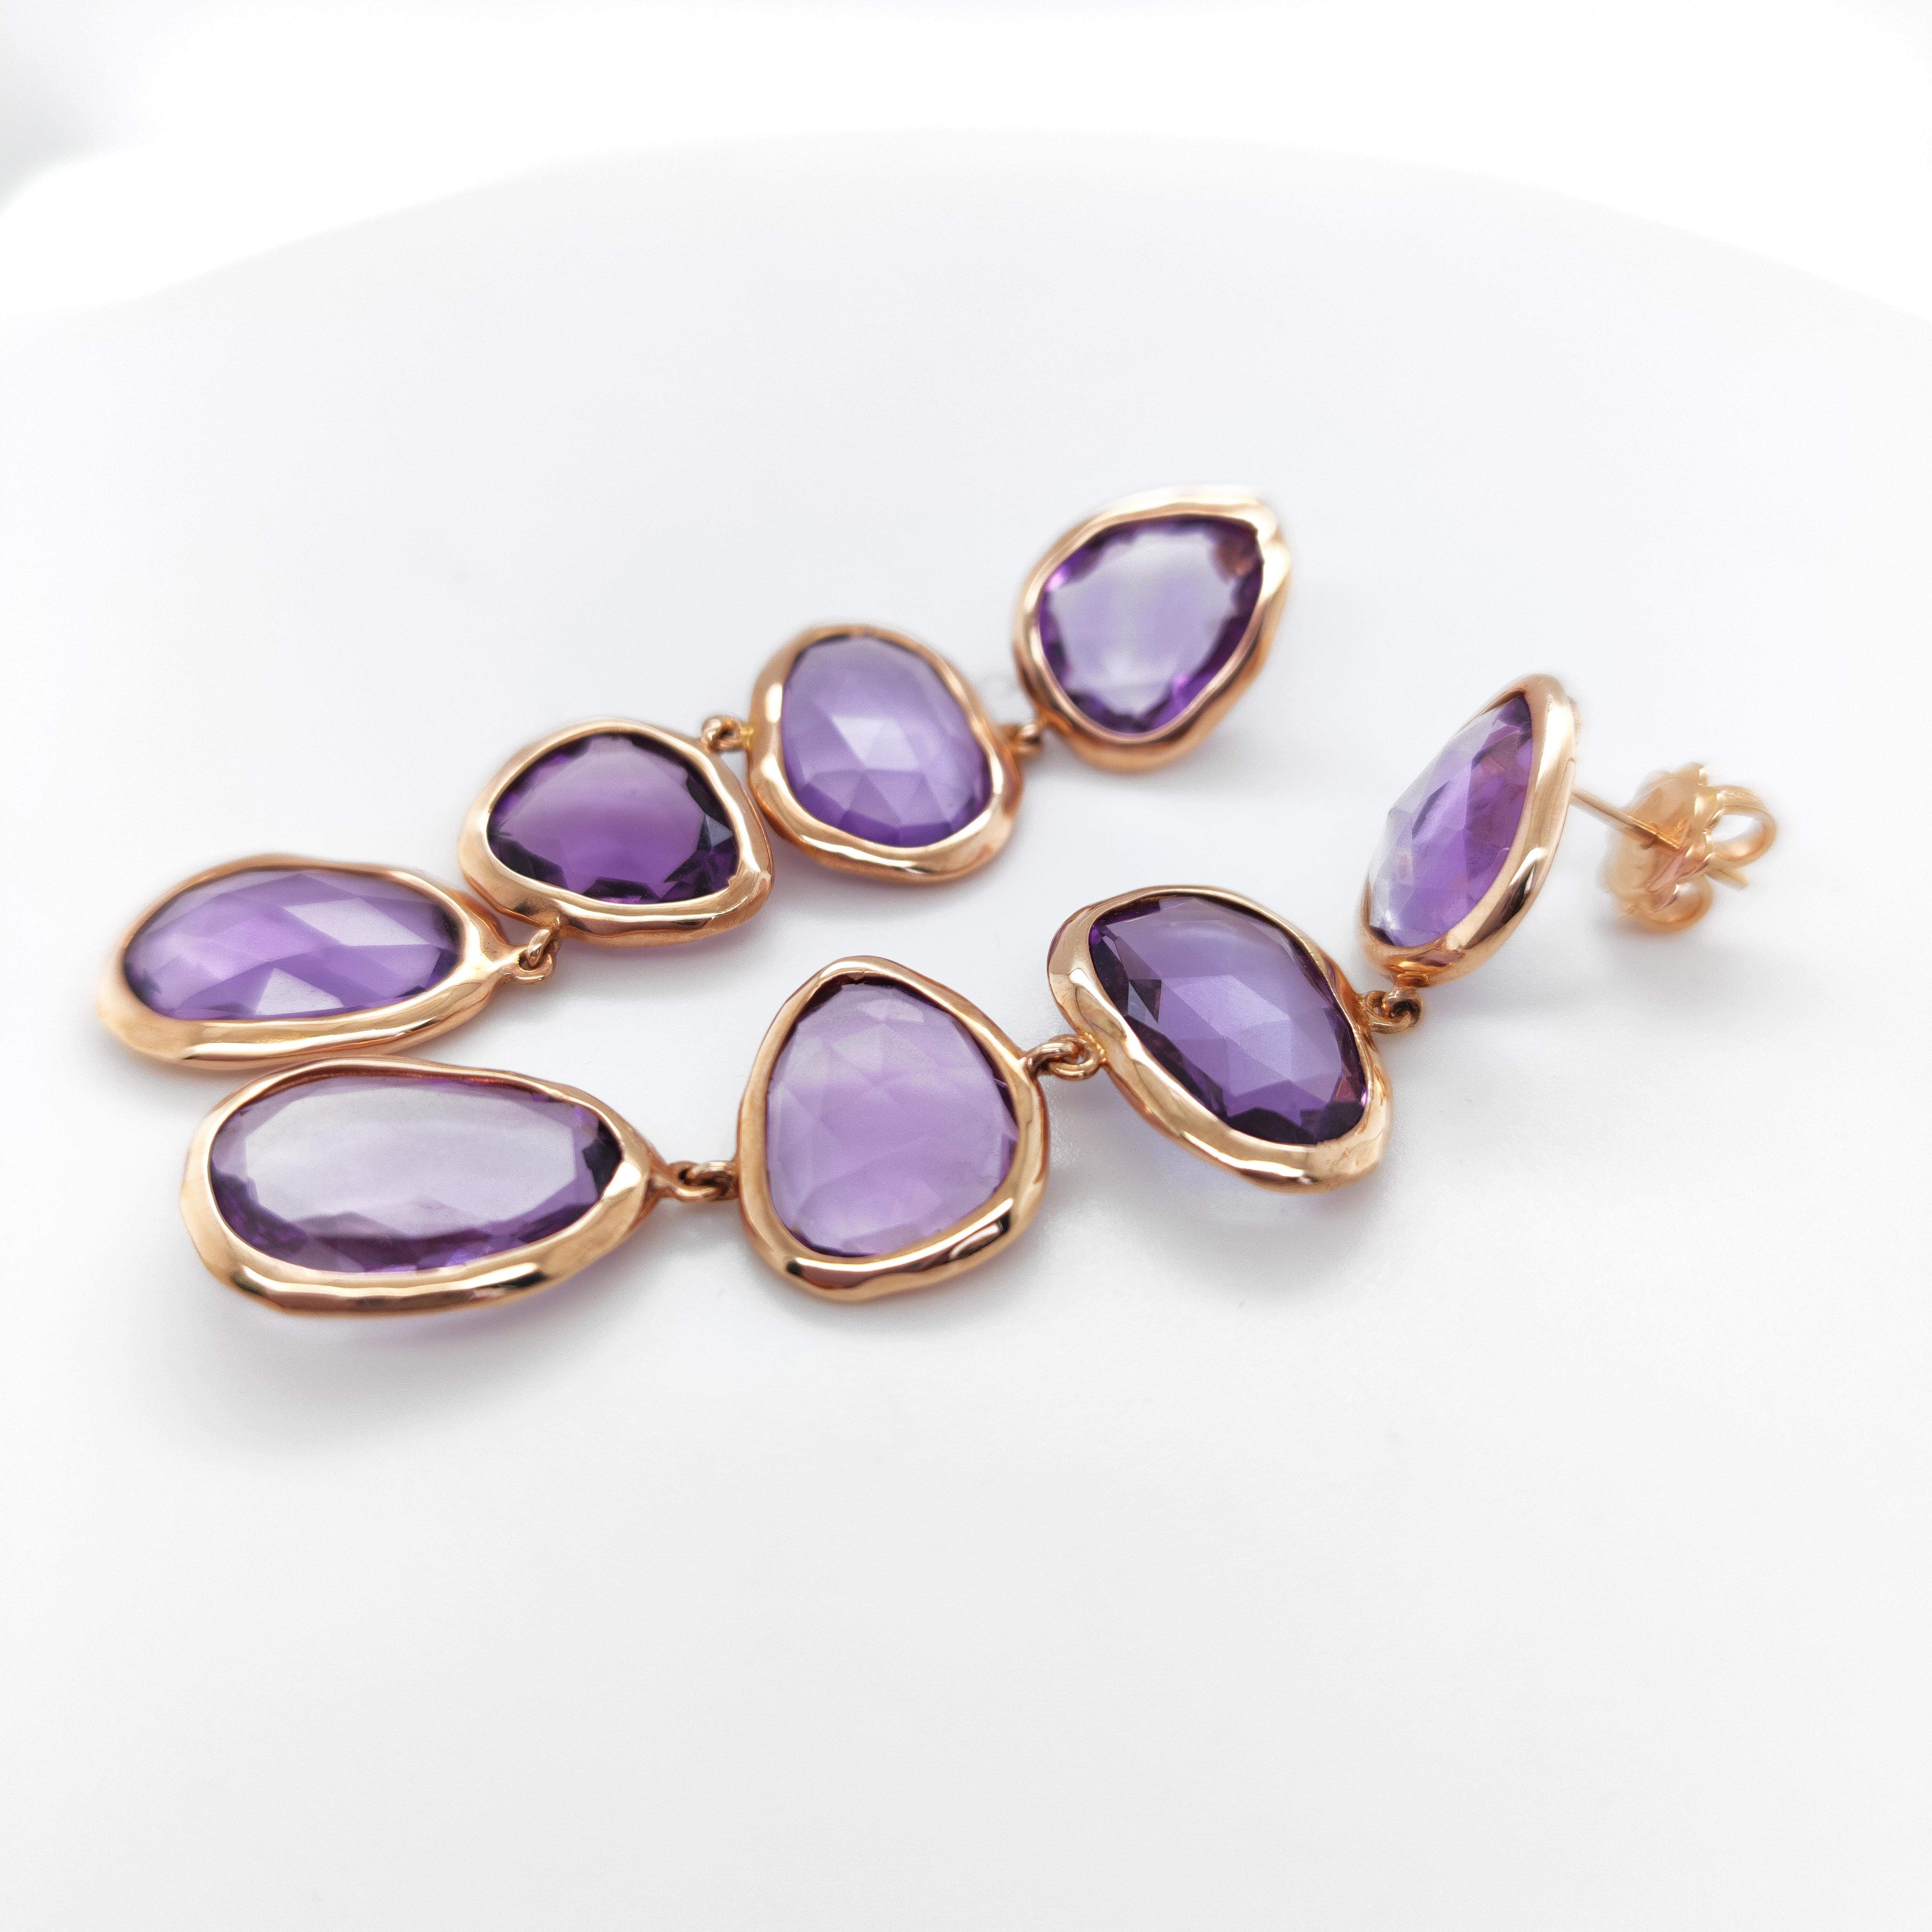 The Dharma collection takes inspiration from far away cultures reinterpreted in an occidental version. 
There is a game of fusion of natural stones, like amethyst in this earrings, featured in flat to mixed-cut stones. The co-presence of a faceted